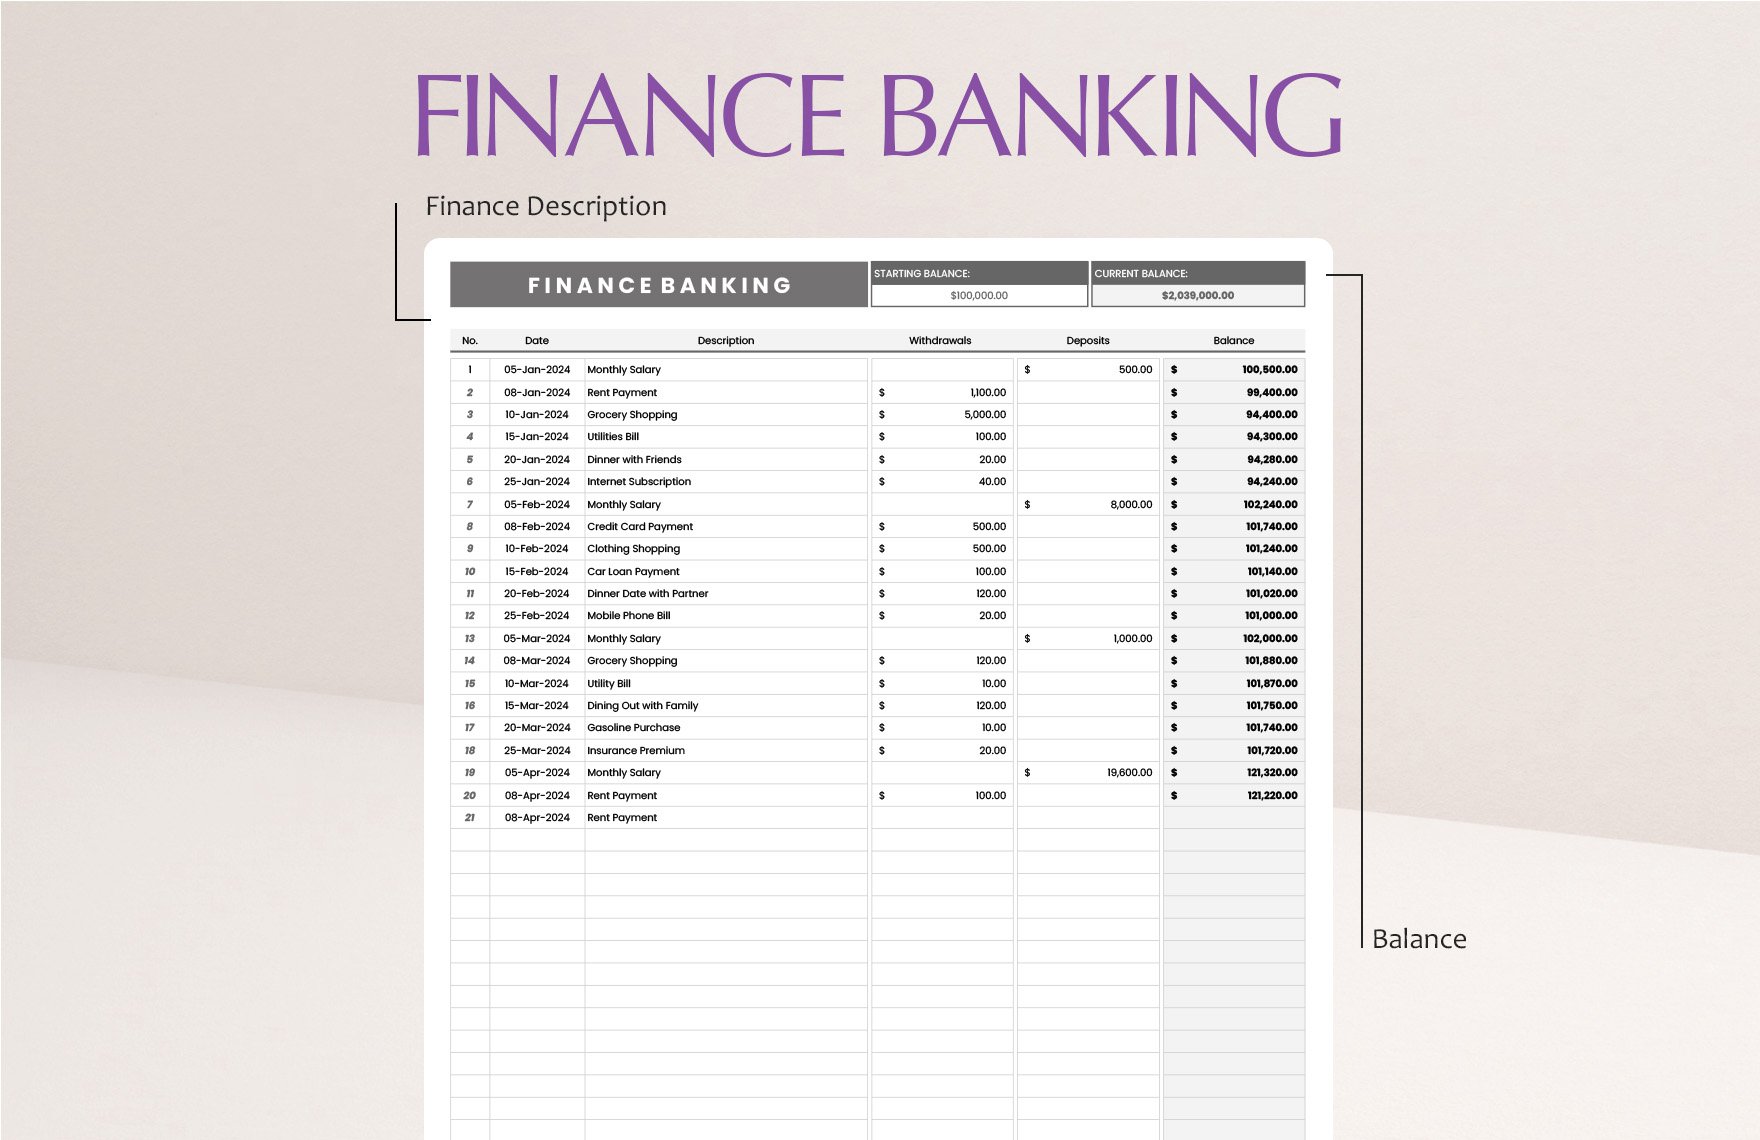 Finance Banking Template